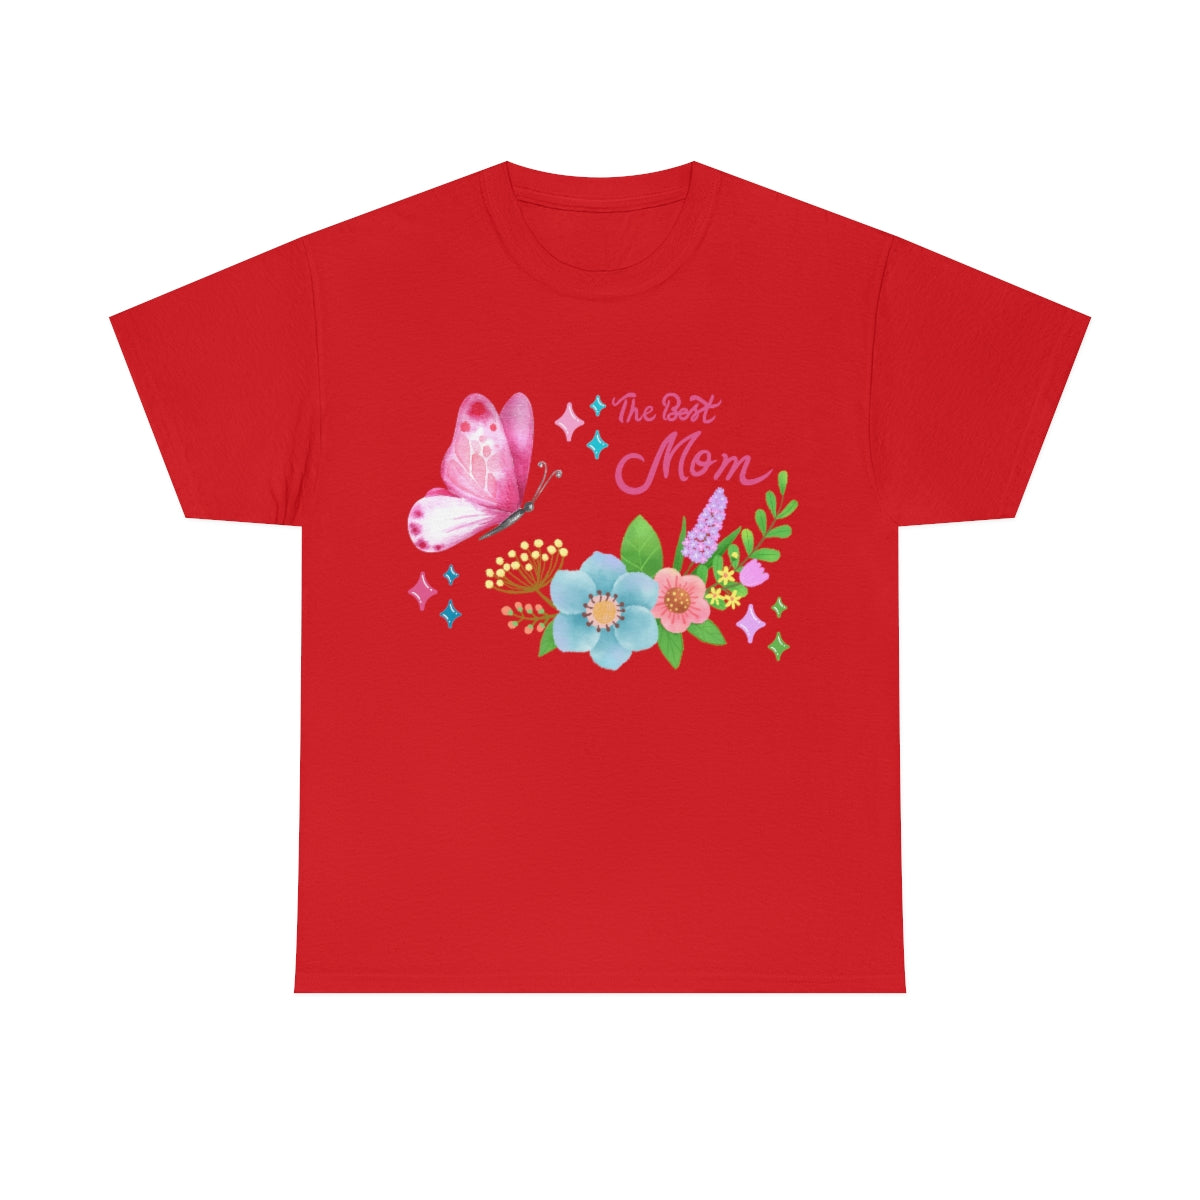 Beautiful Flowers with Butterfly "The  Best Mom"  Cotton Tee